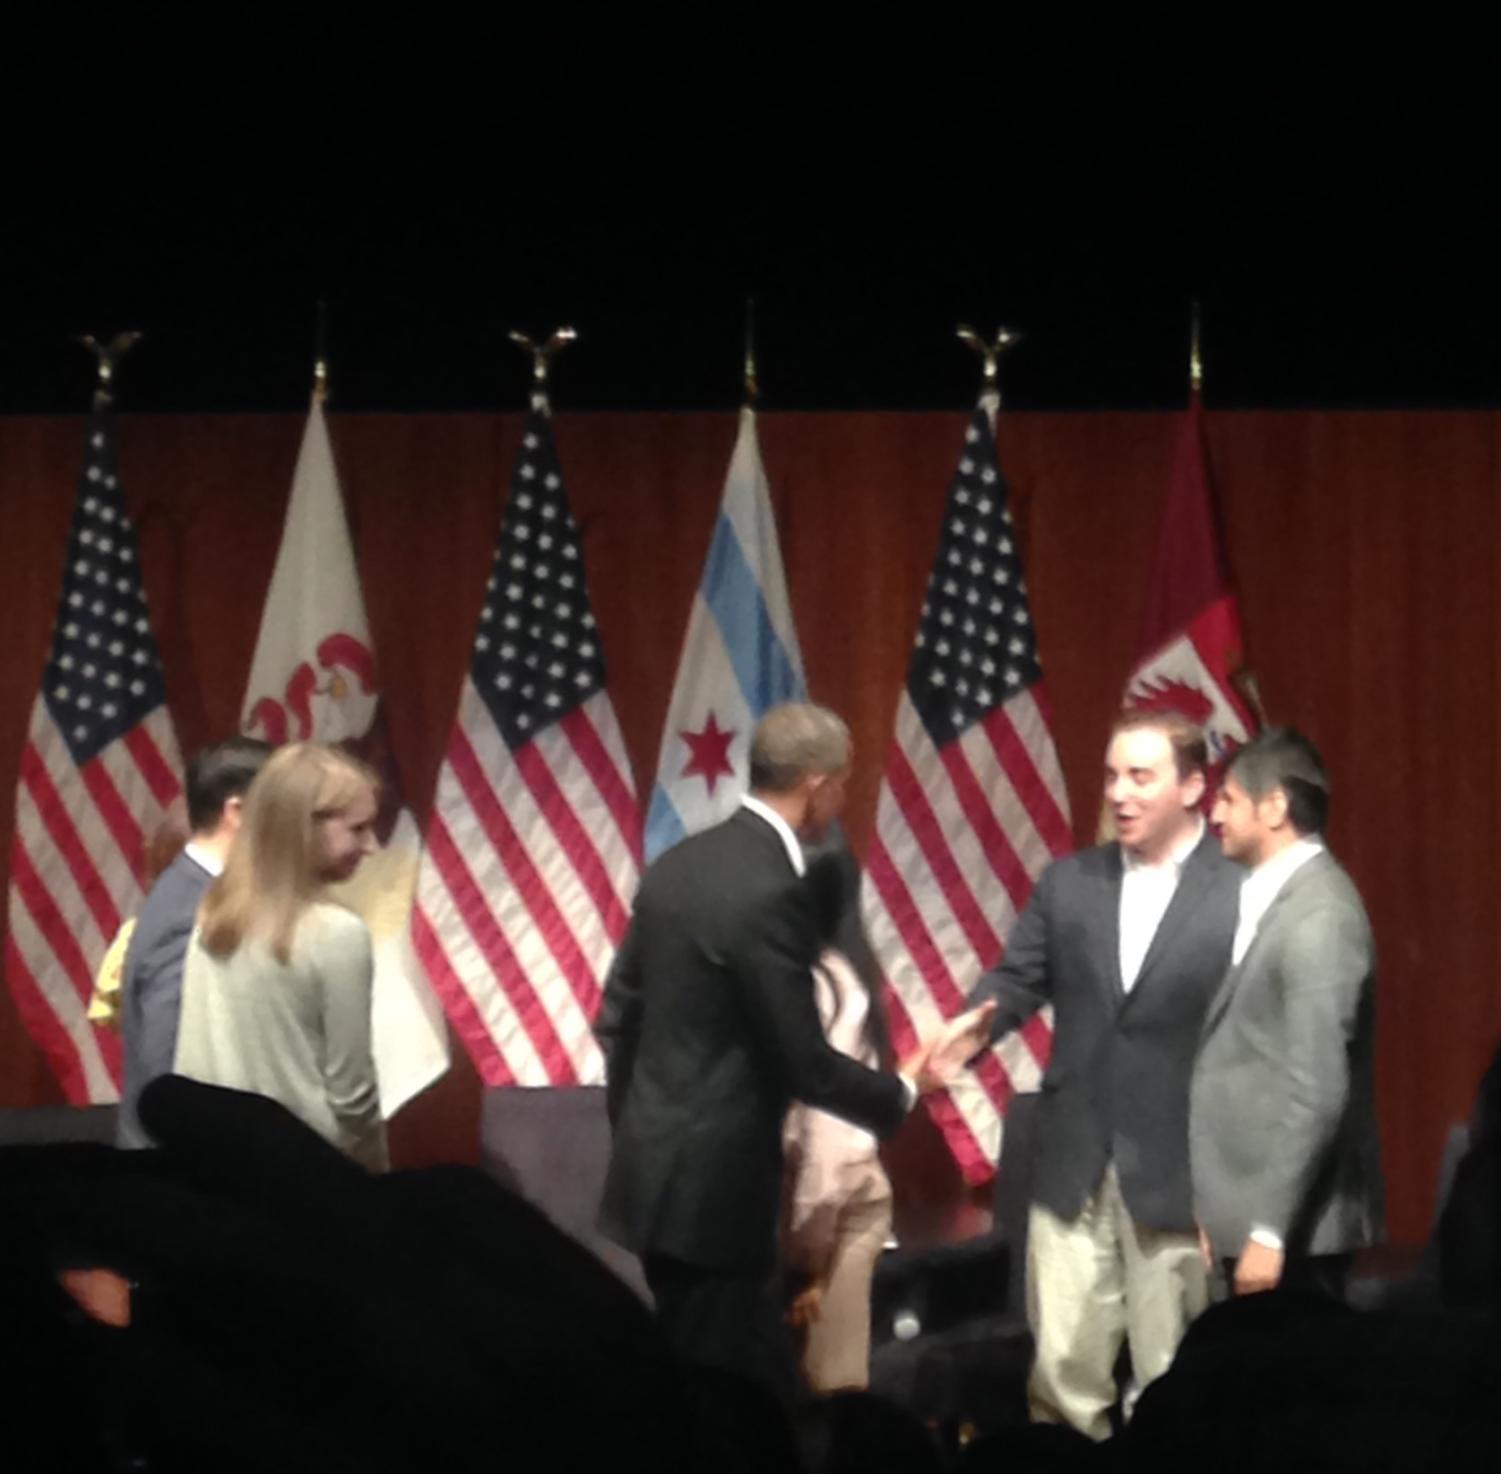 Obama shook hands with panelists and then with members of the audience following the event.